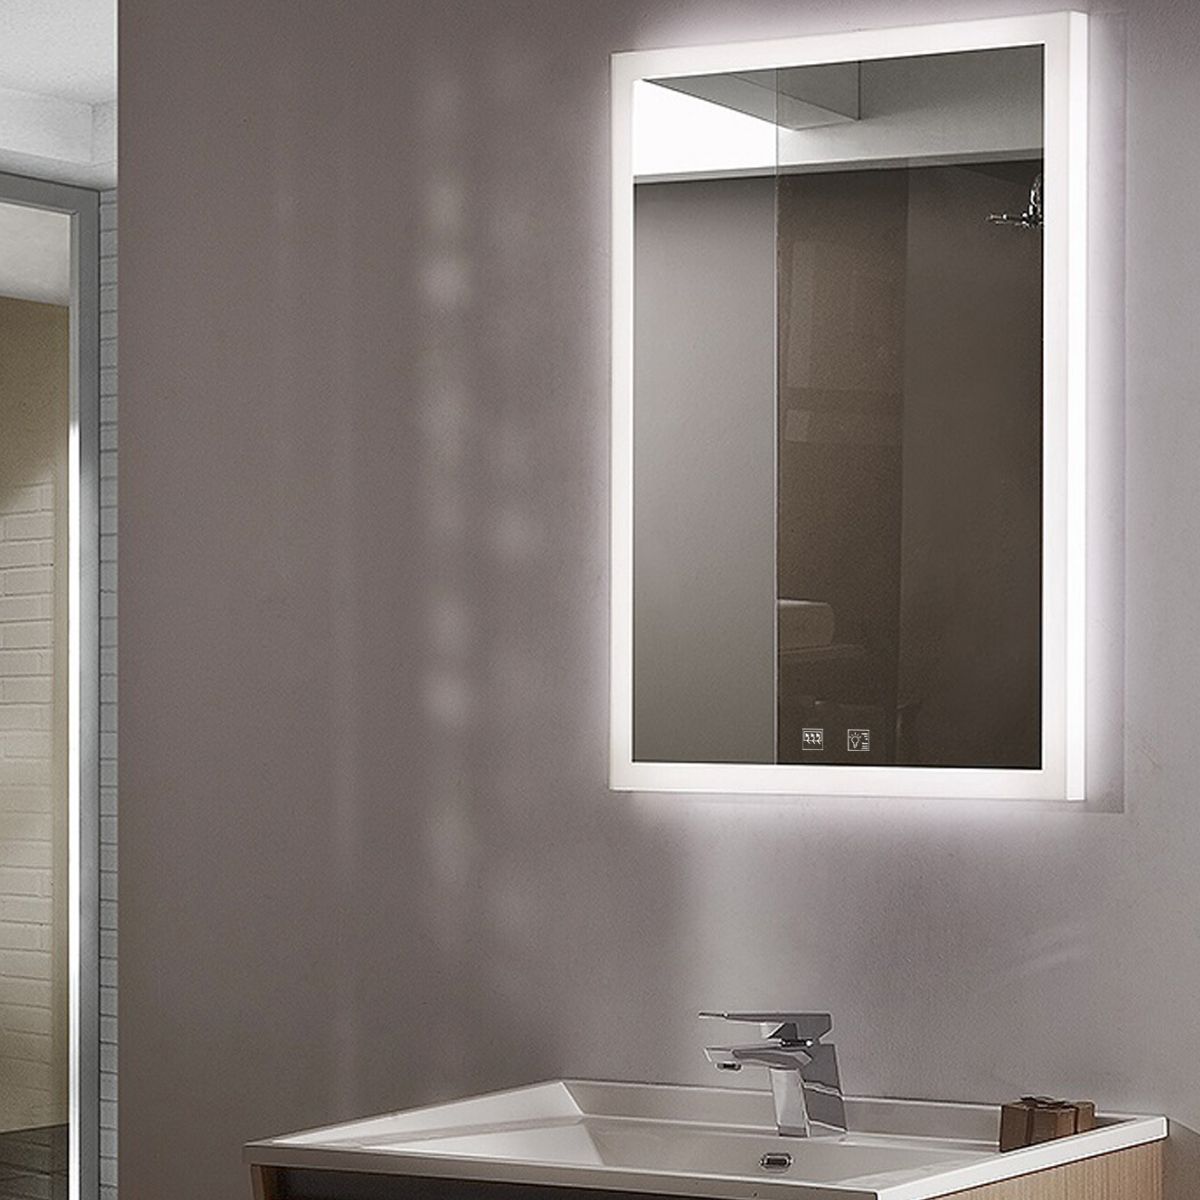 LED Mirror, Colour Adjustable With Demister